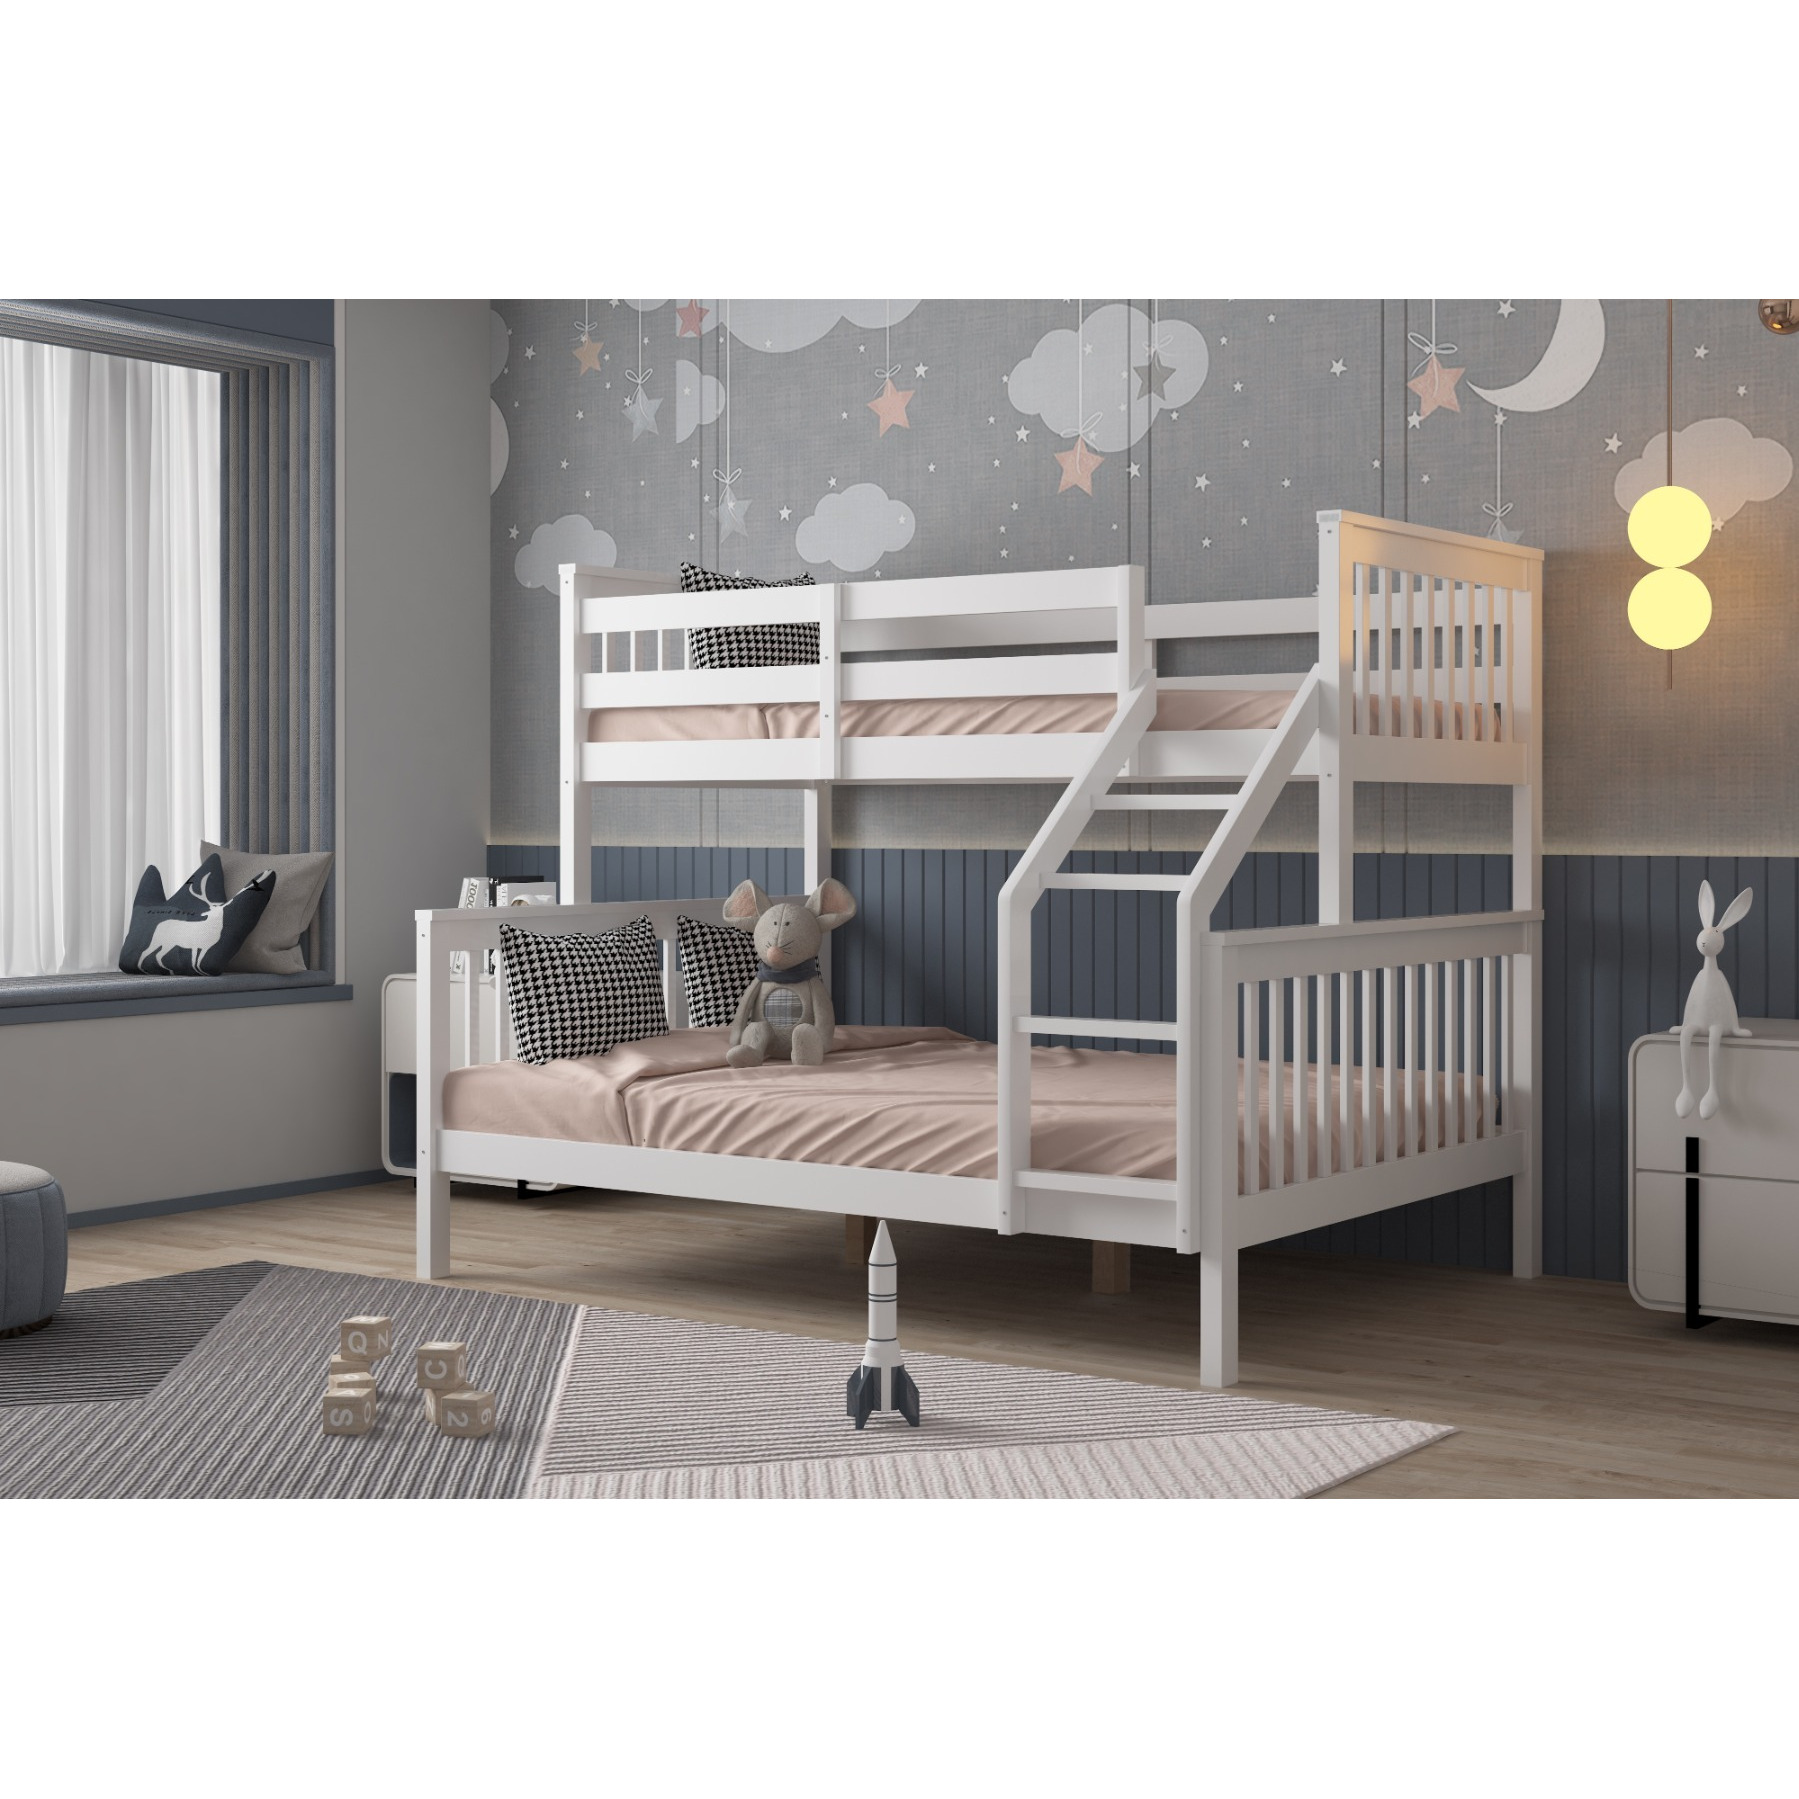 Flair Wooden Zoom Triple Bunk Bed White - image 1